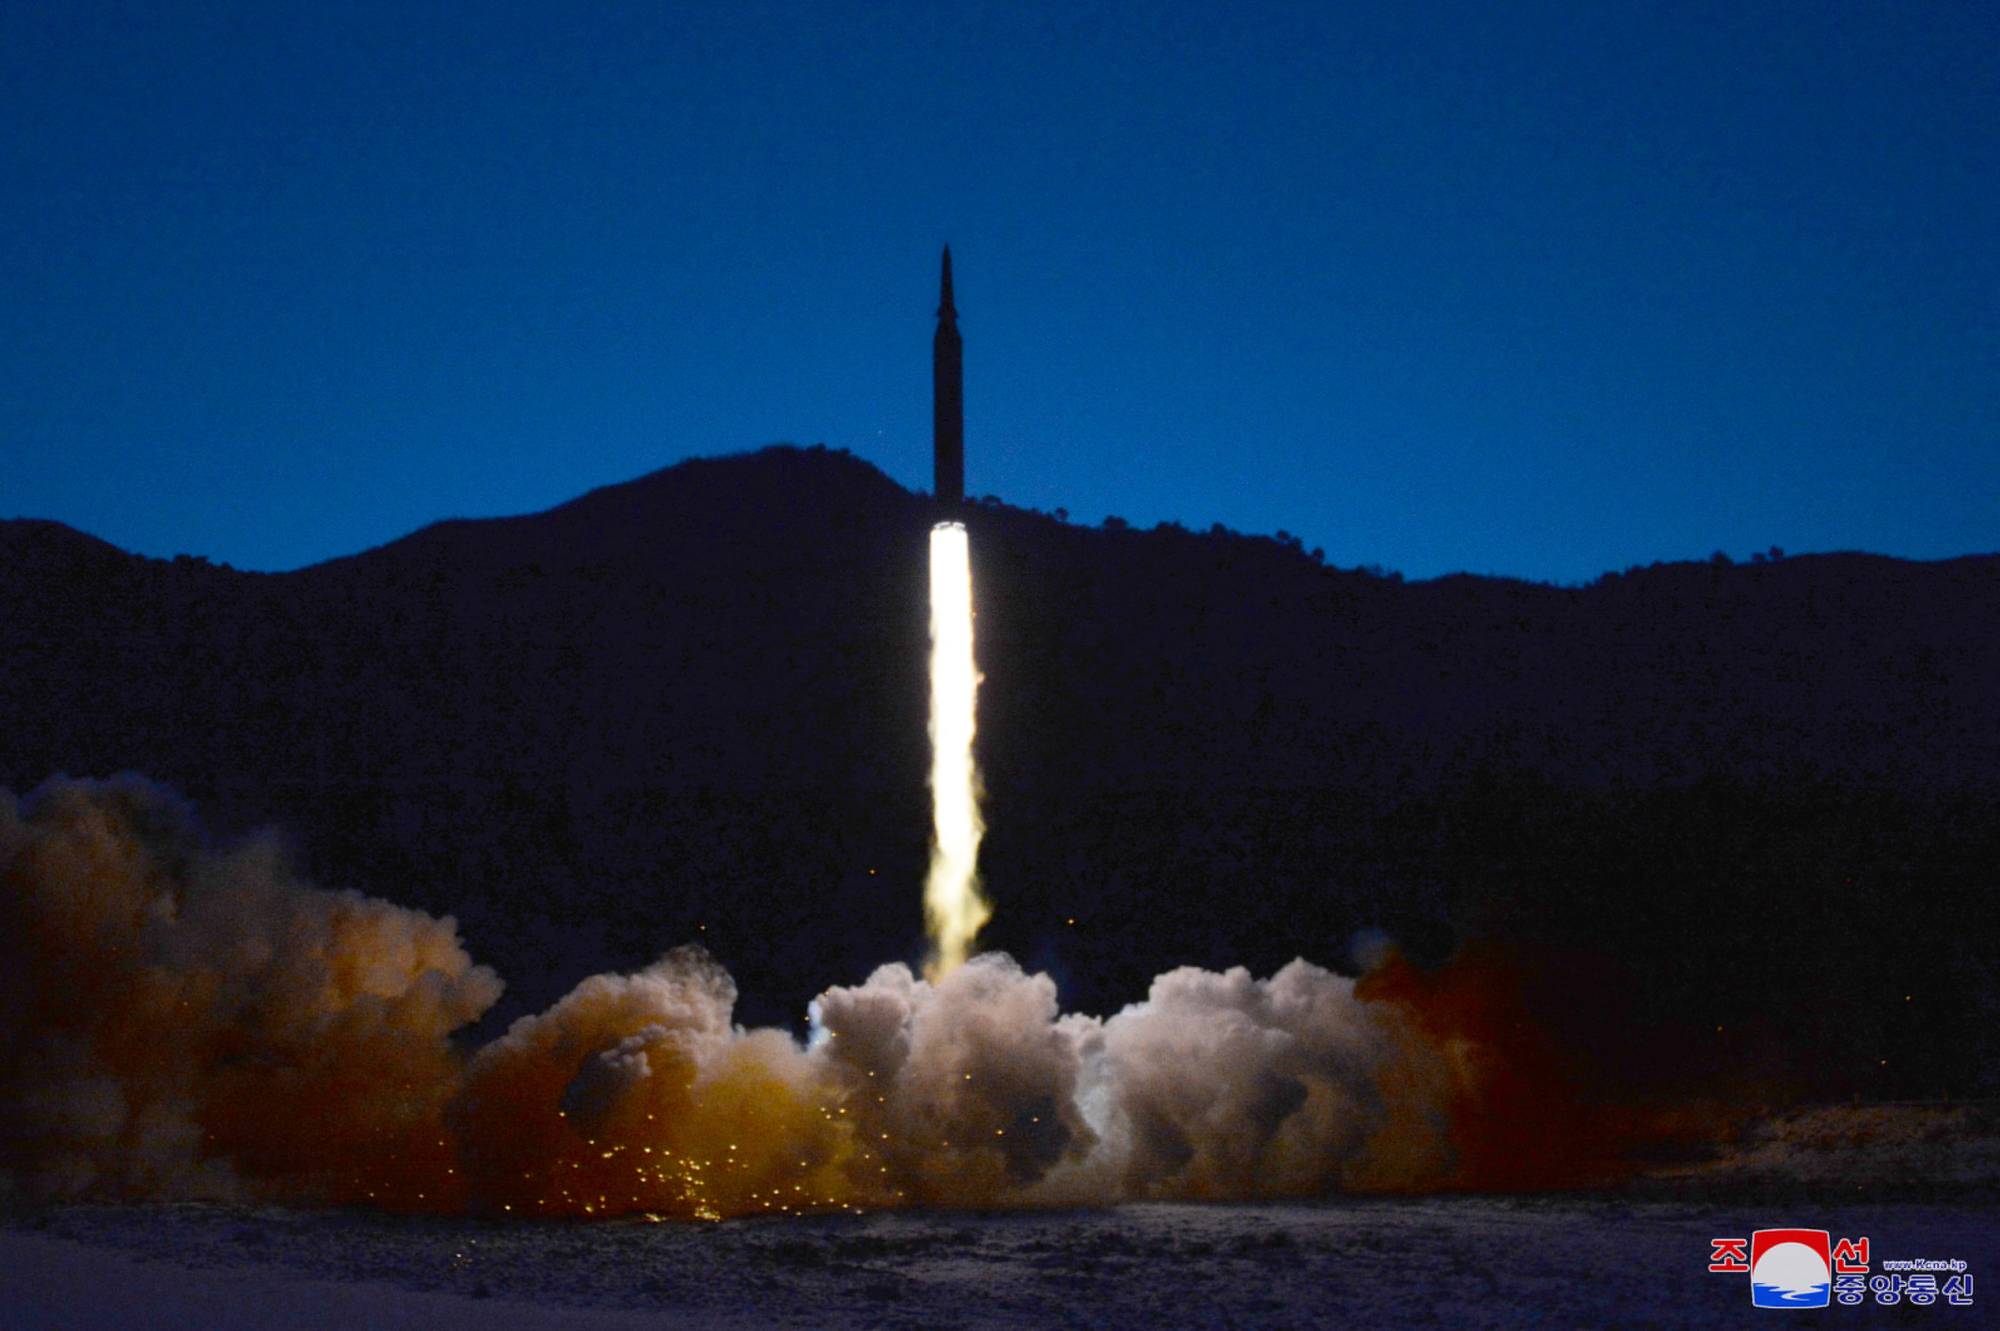 A North Korean missile is launched from an undisclosed location in the country on Tuesday.  | KCNA / VIA REUTERS